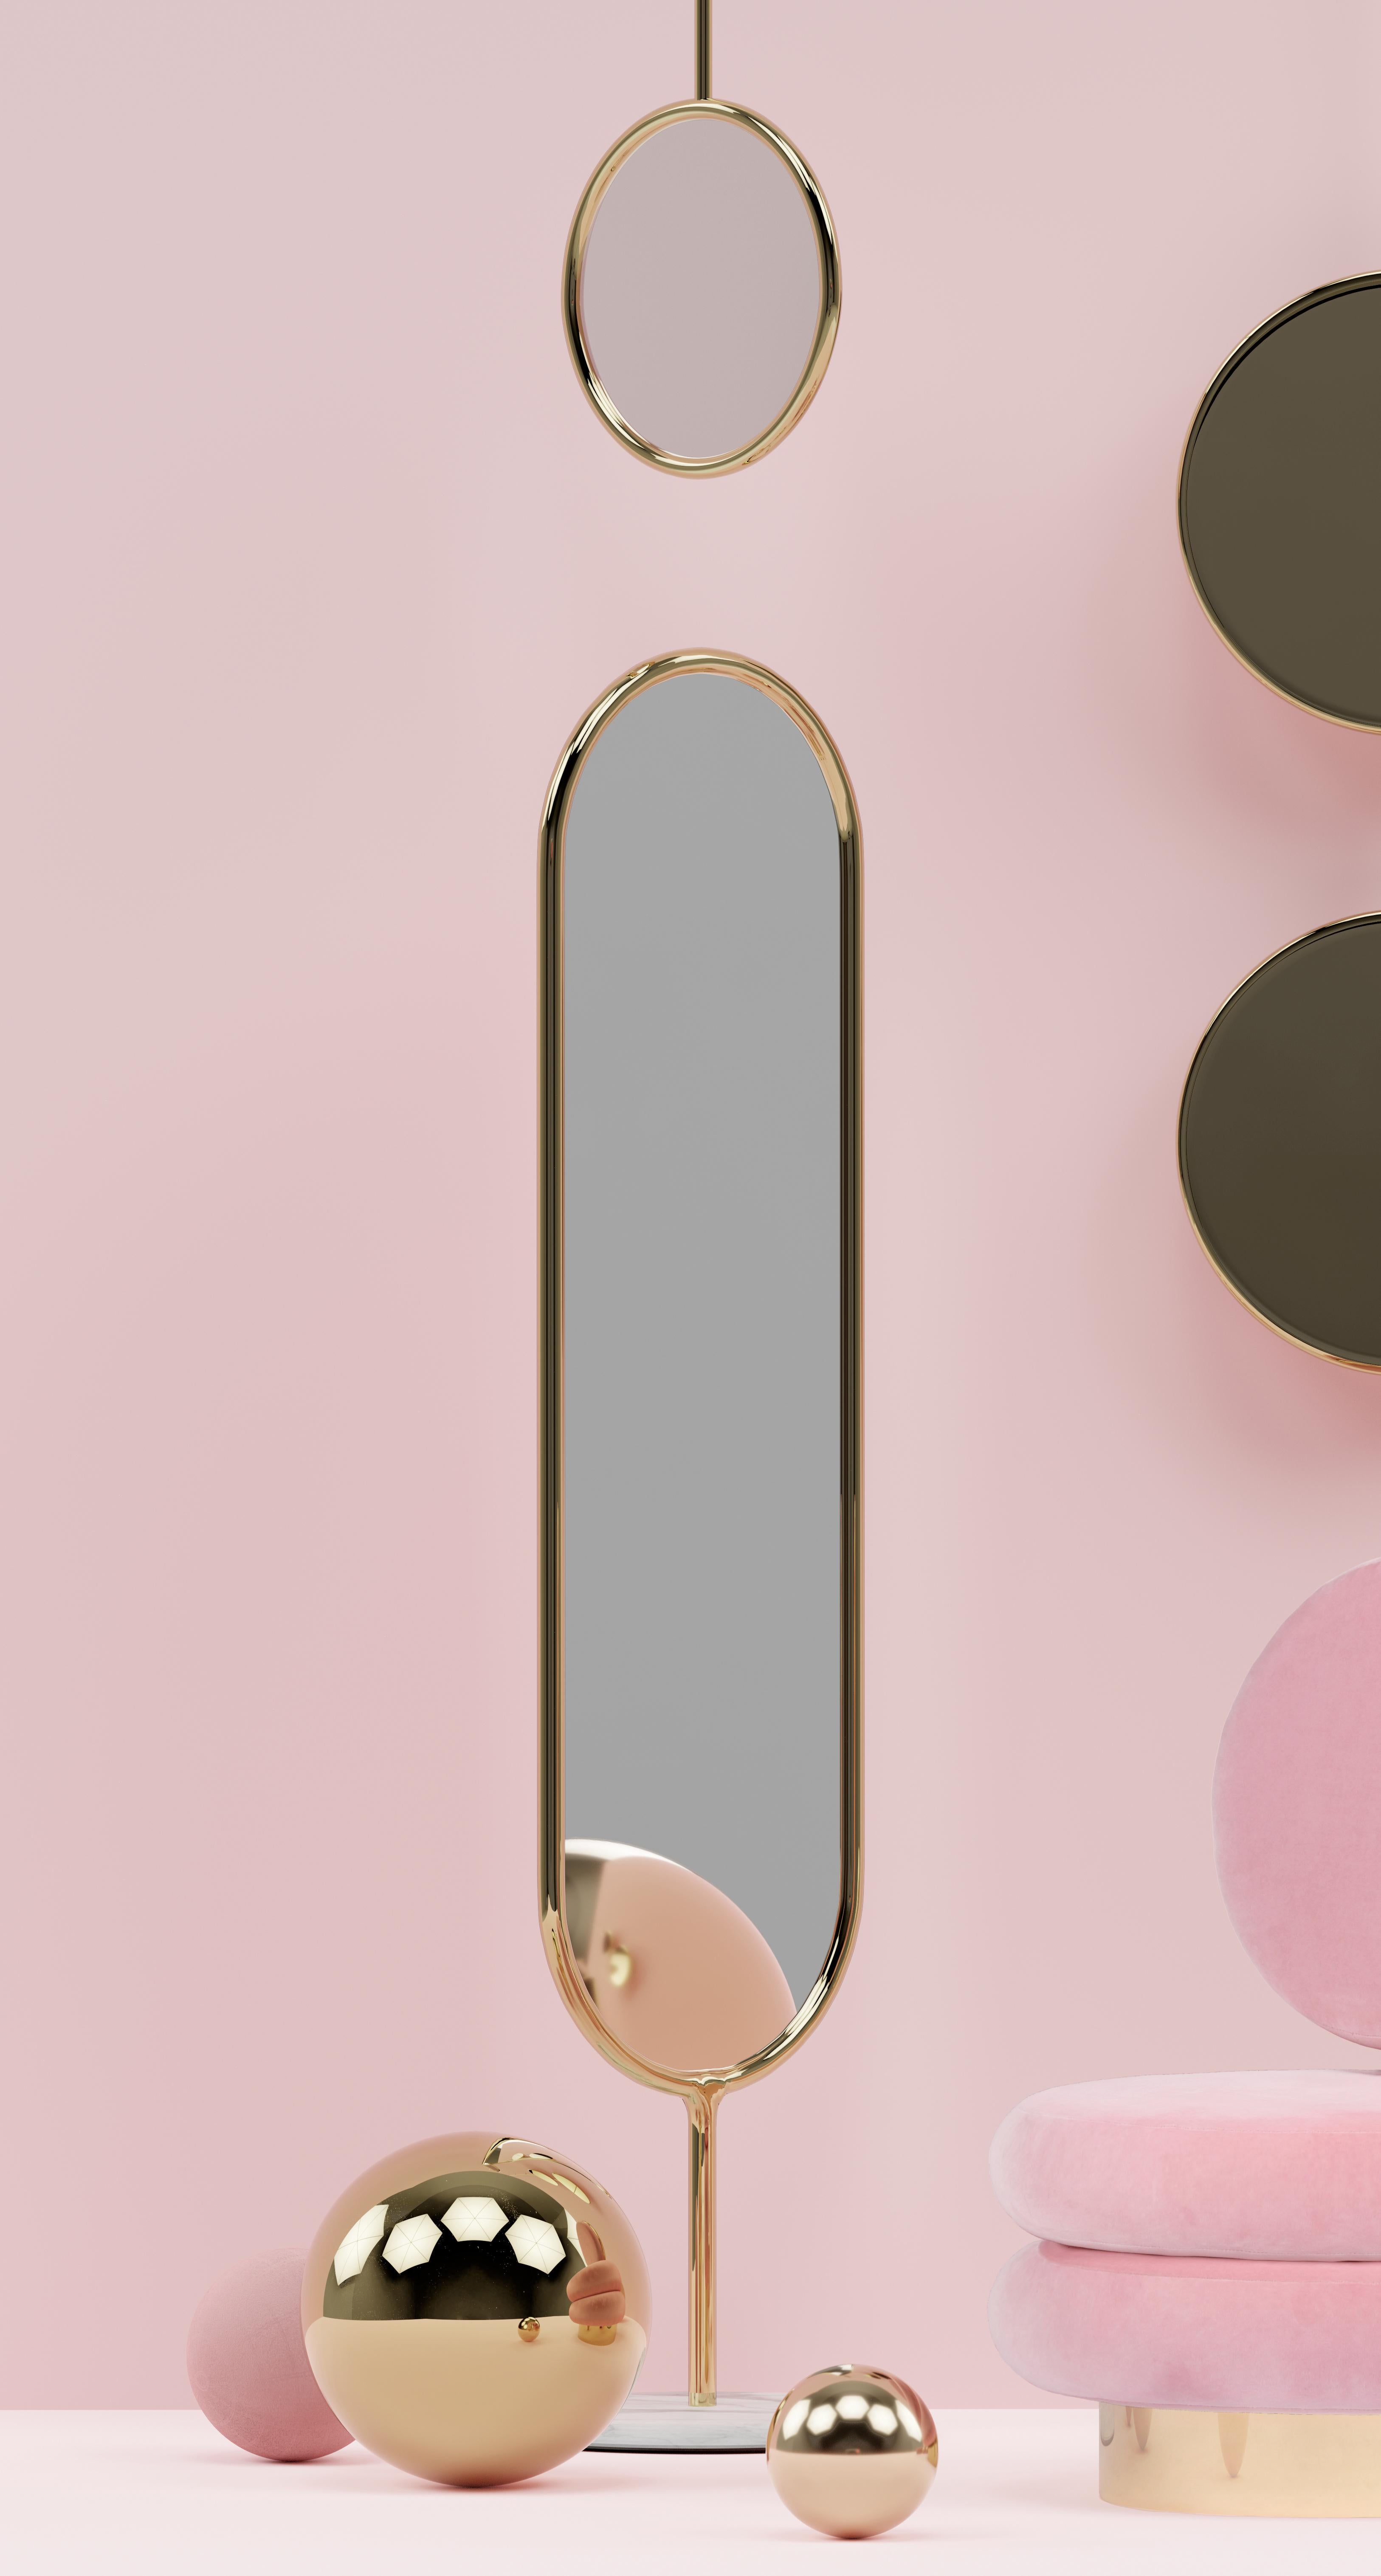 Polished Brass and Marble Marshmallow Floor Mirror, Royal Stranger
Dimensions: 183 x 44 x 44 cm
Materials: Polished brass structure standing on the top of a Carrara marble

A round shaped and elegant mirror standing on the top of a luxurious marble